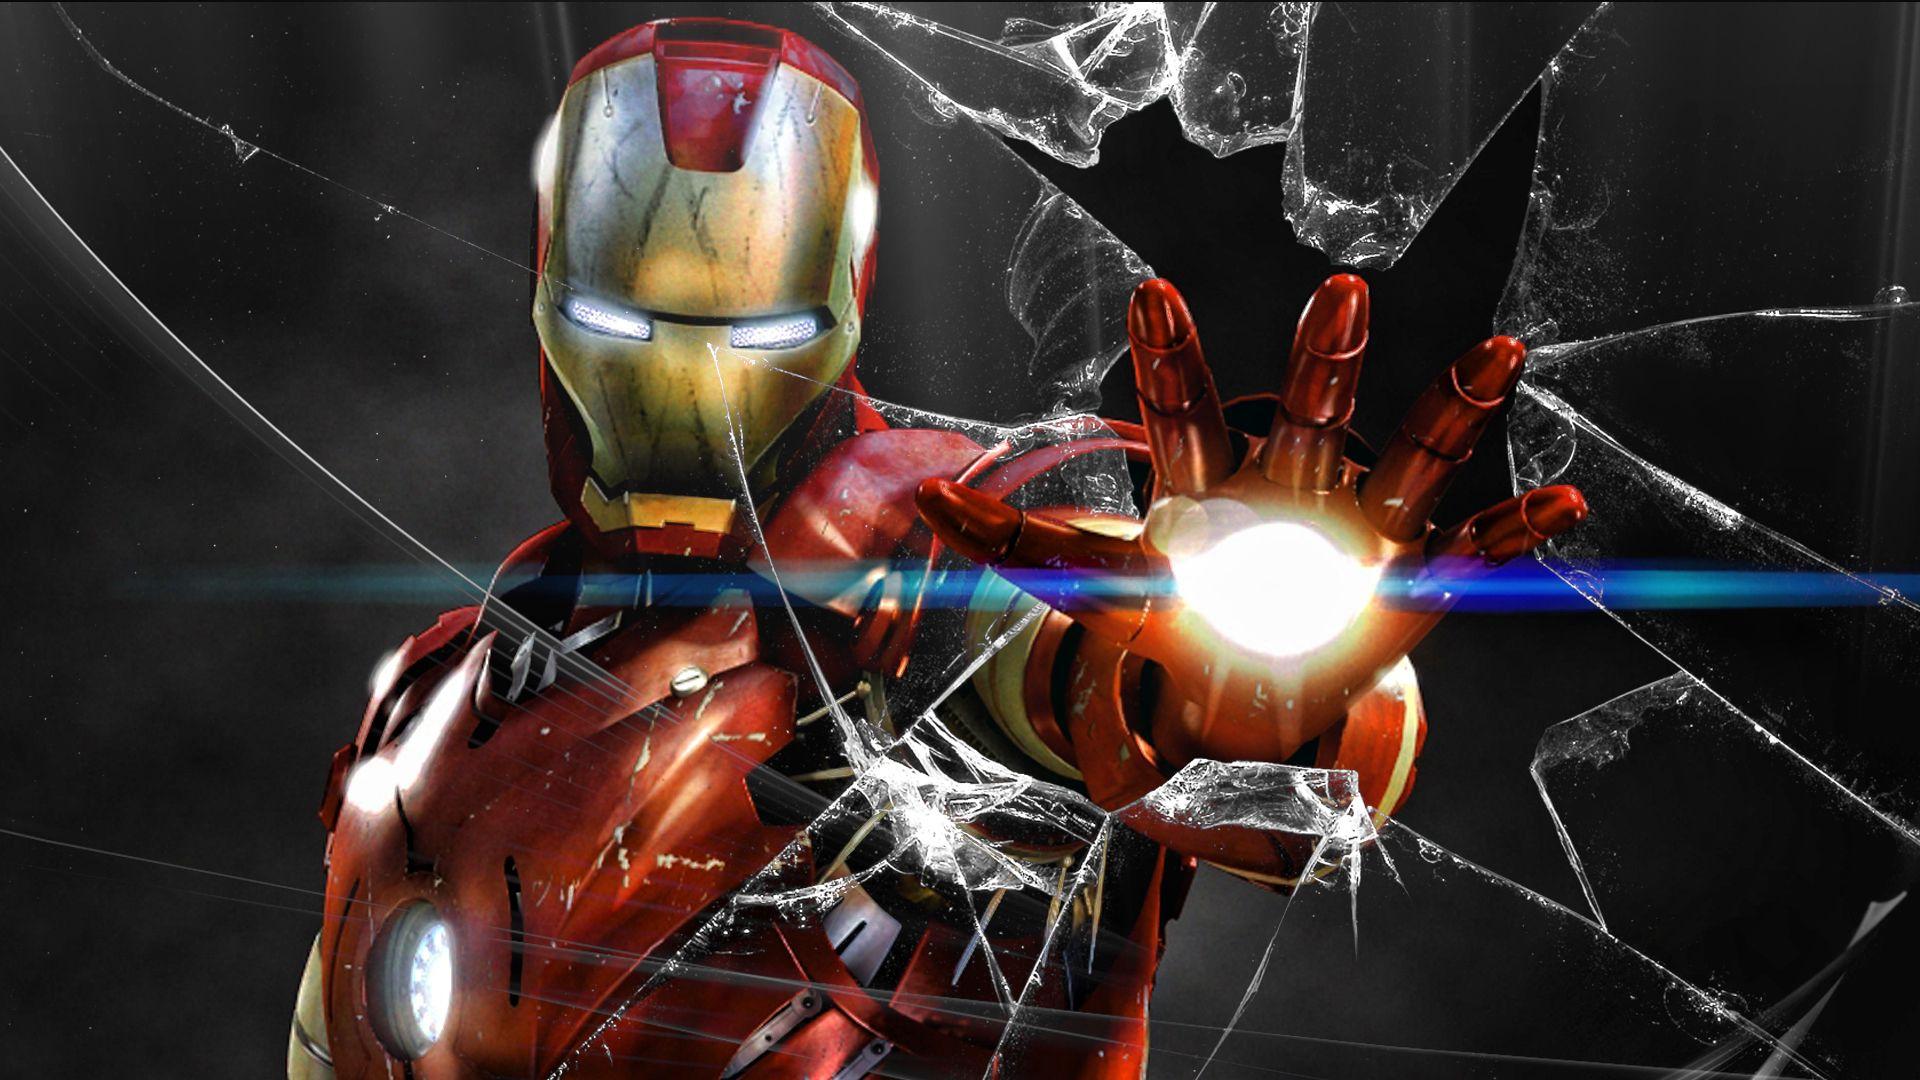 Iron Man For PC Wallpapers - Wallpaper Cave